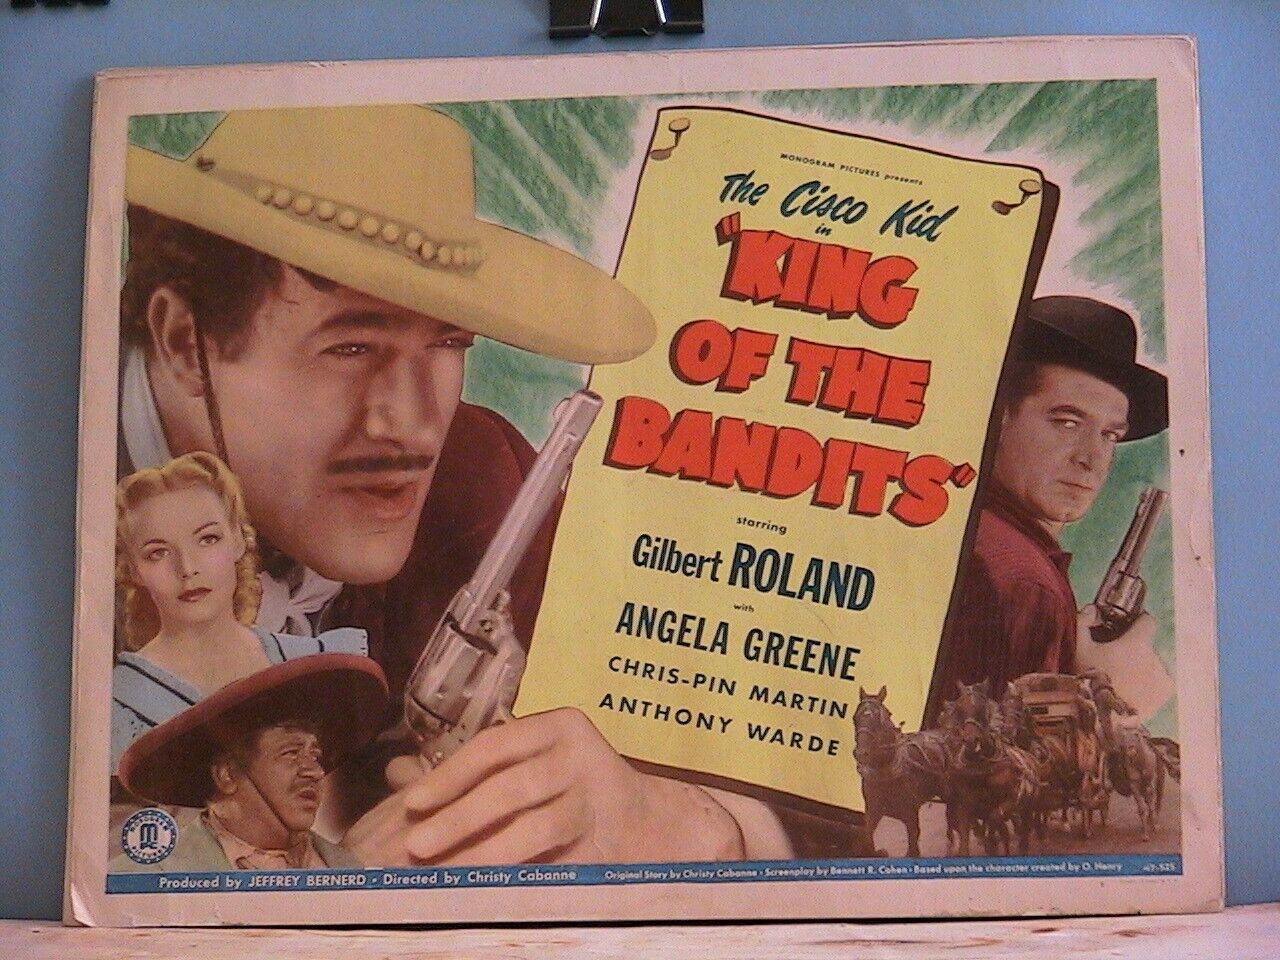 VINTAGE LOBBY CARDS-7-GILBERT ROLAND-CISCO KID-KING OF THE BANDITS-1947-TITLE C. Без бренда